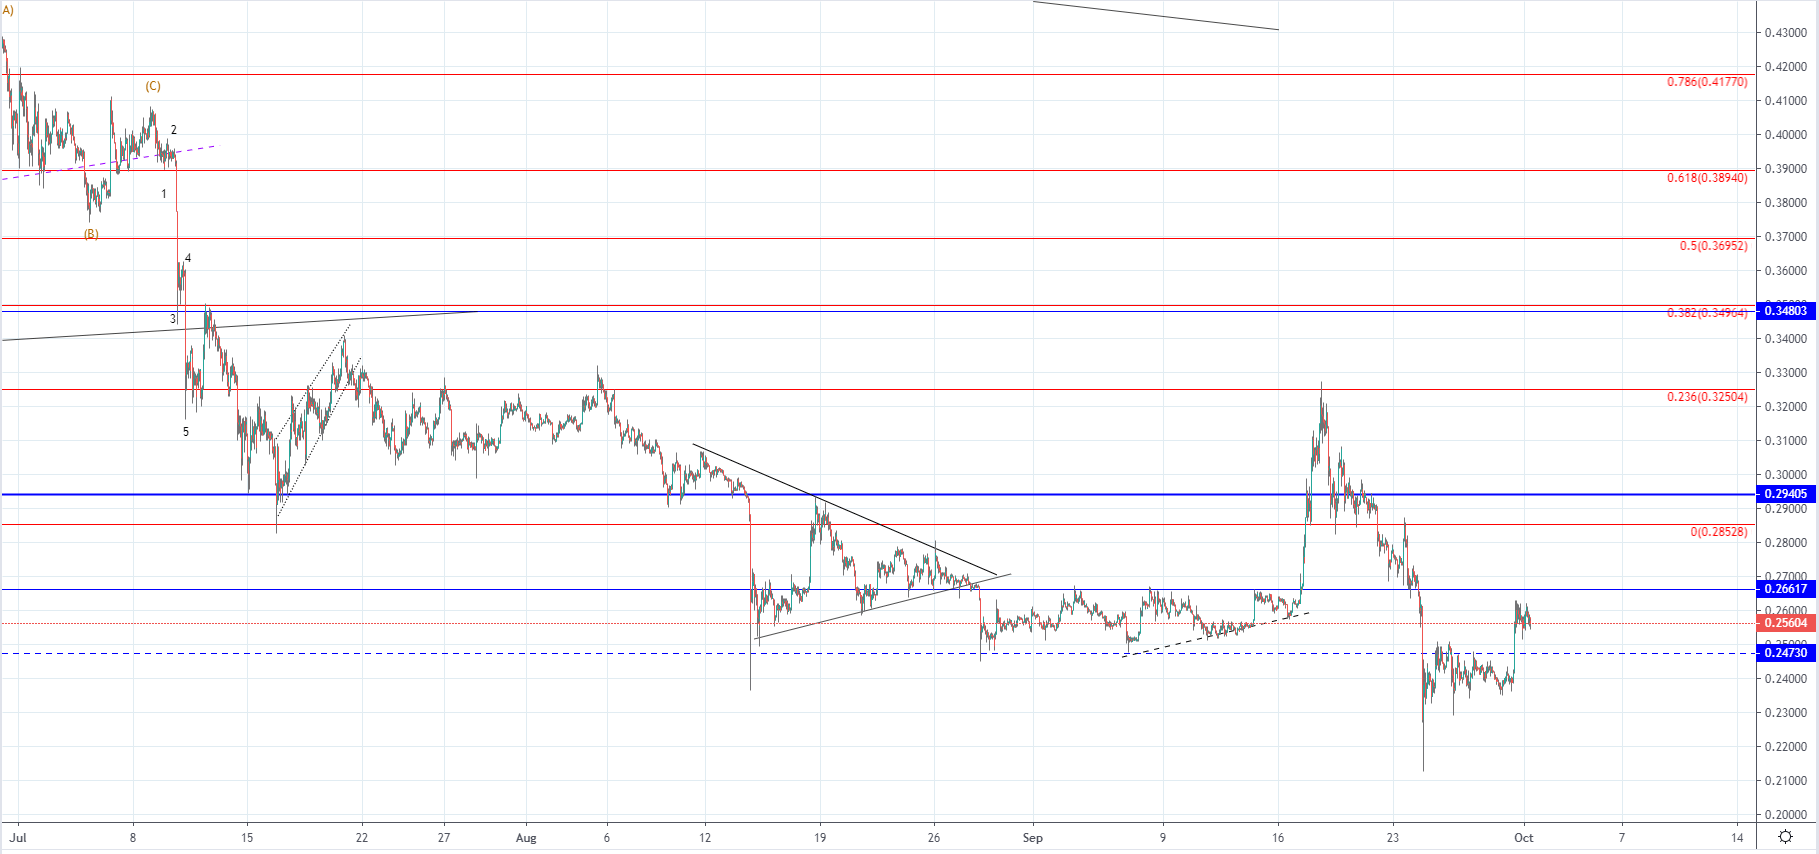 BTC and XRP - Recovery seen but it could still be corrective